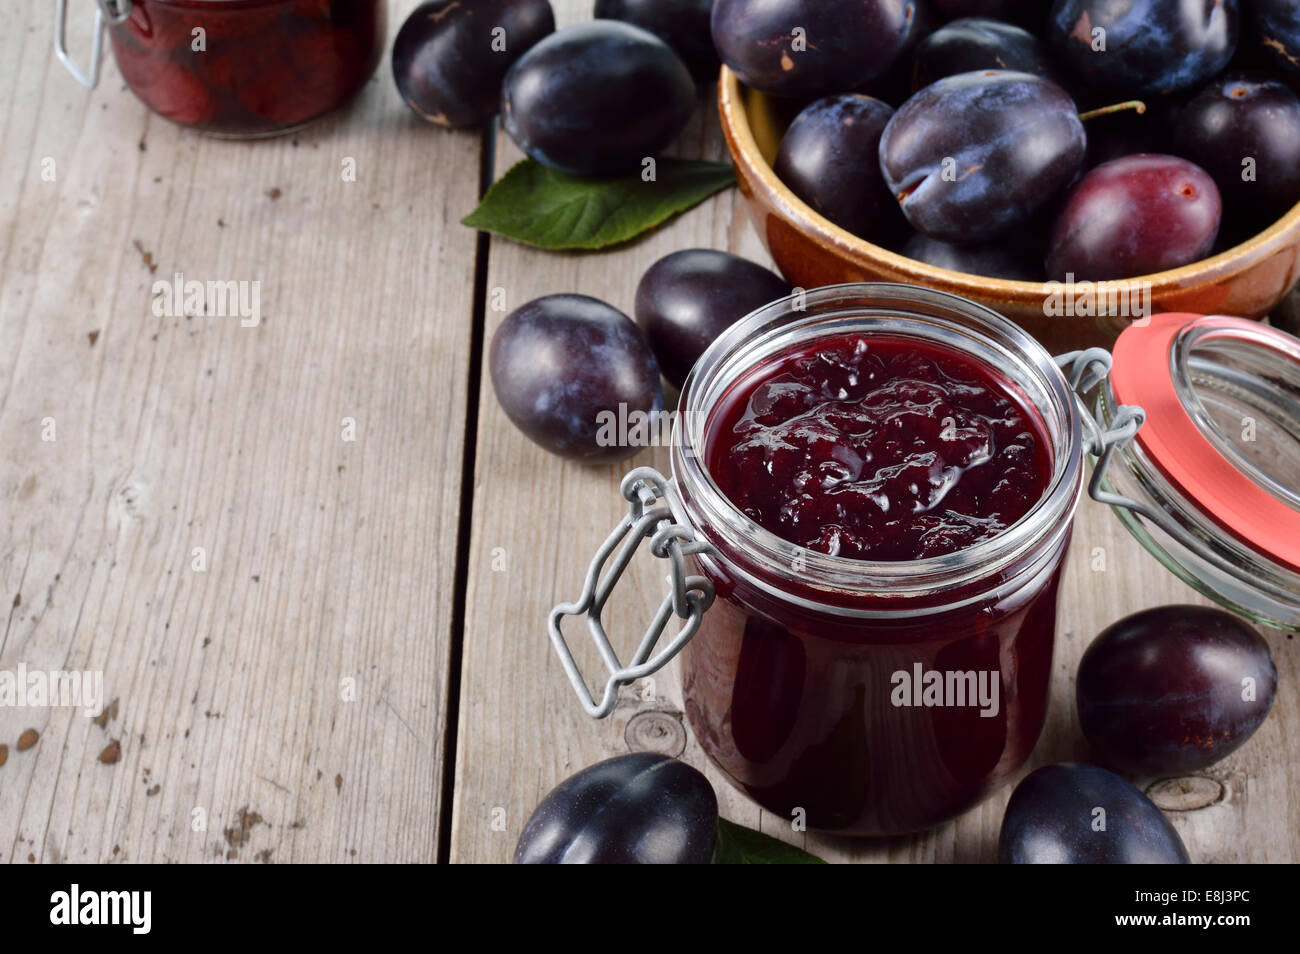 Homemade plum jam and group of plums on old wooden table. Plenty of copyspace. Stock Photo